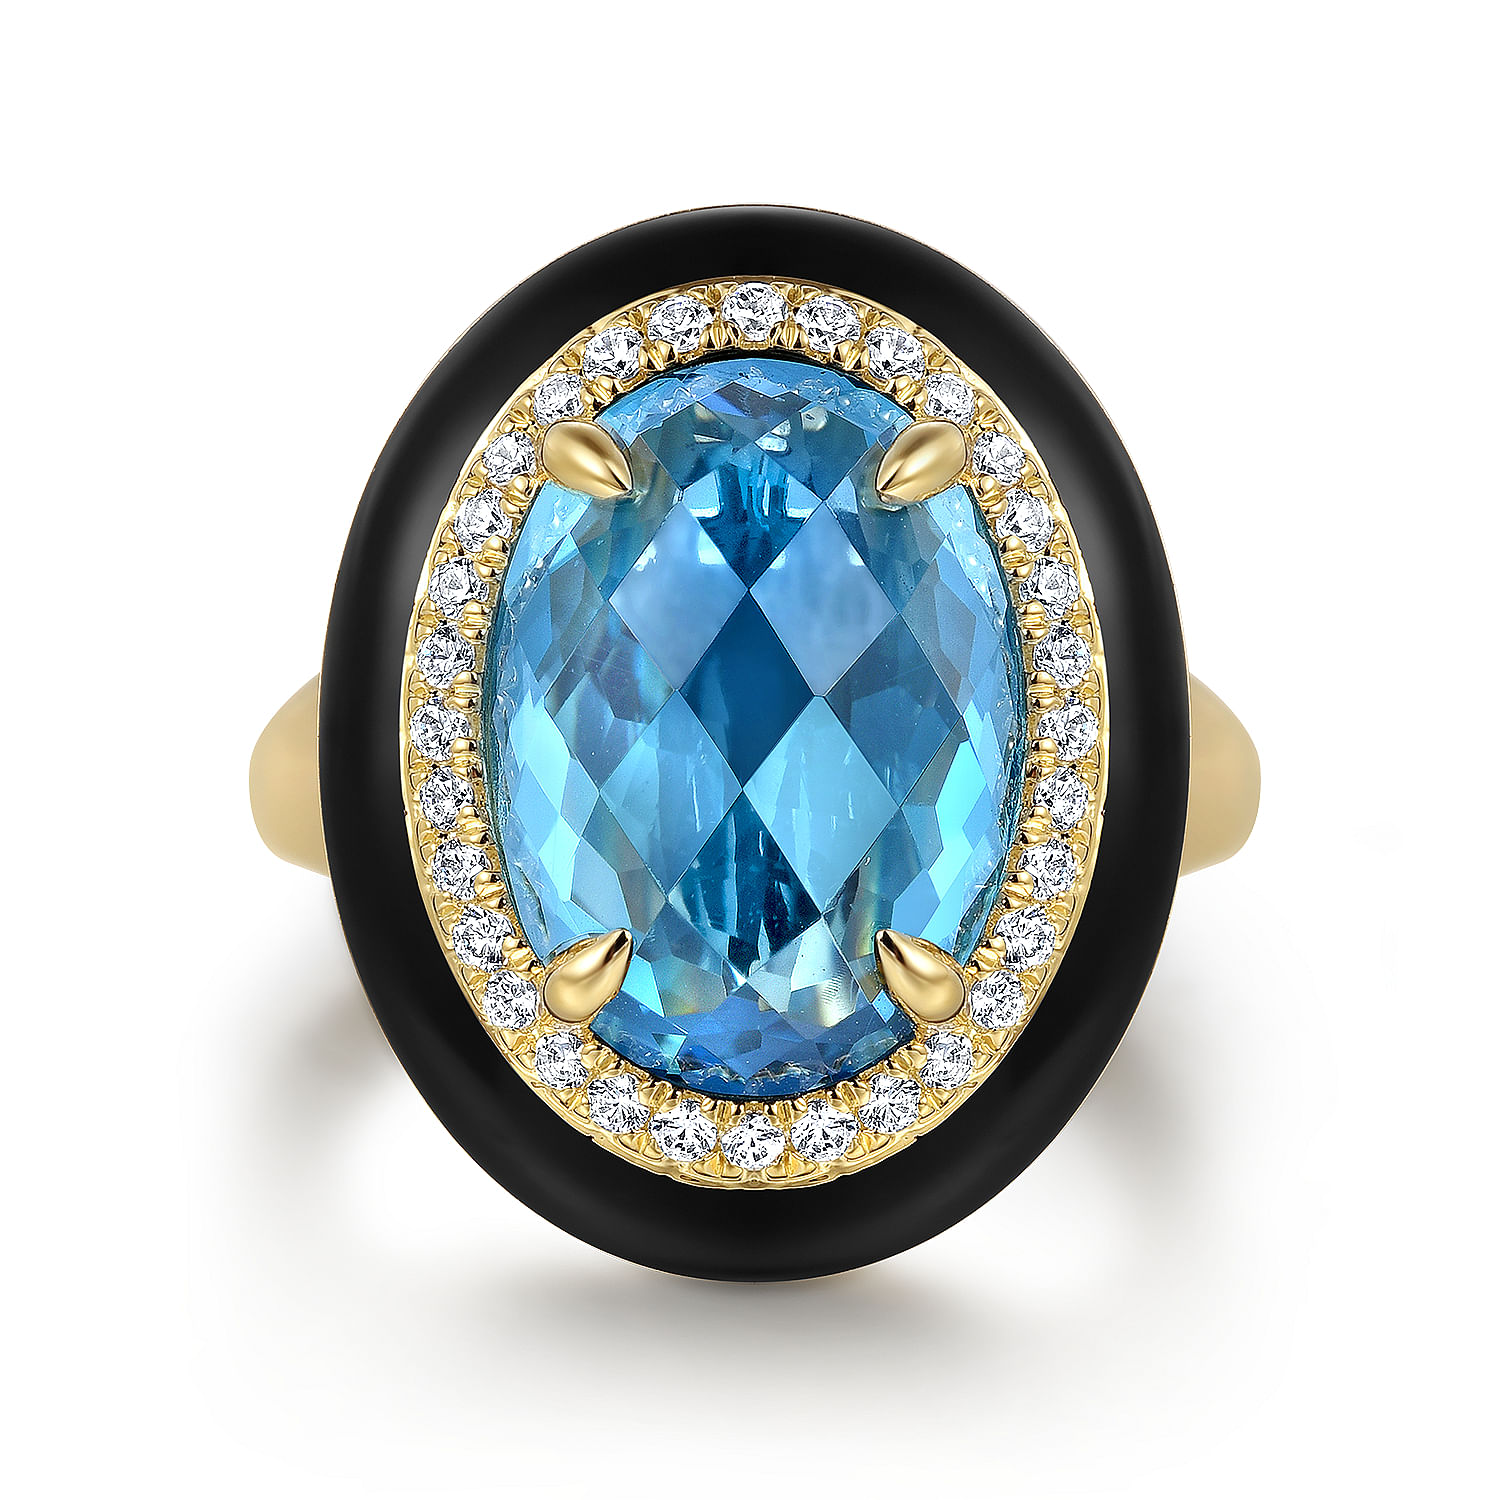 Enamel---14K-Yellow-Gold-Diamond-and-Oval-Shape-Blue-Topaz-Ladies-Ring-With-Flower-Pattern-J-Back-and-Black-Enamel1